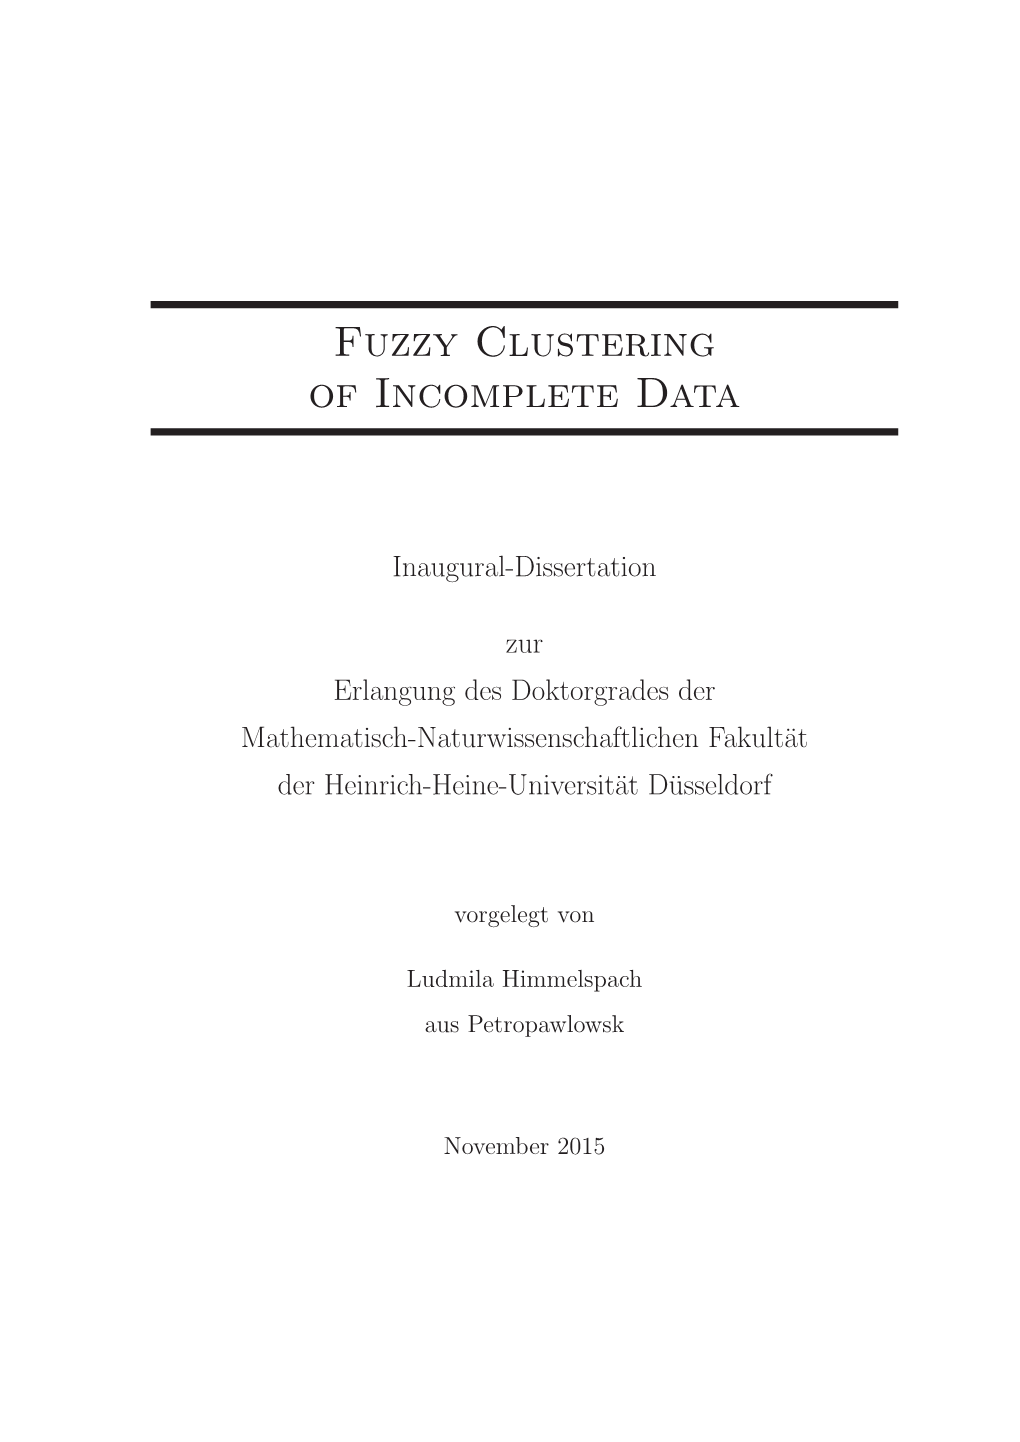 Fuzzy Clustering of Incomplete Data